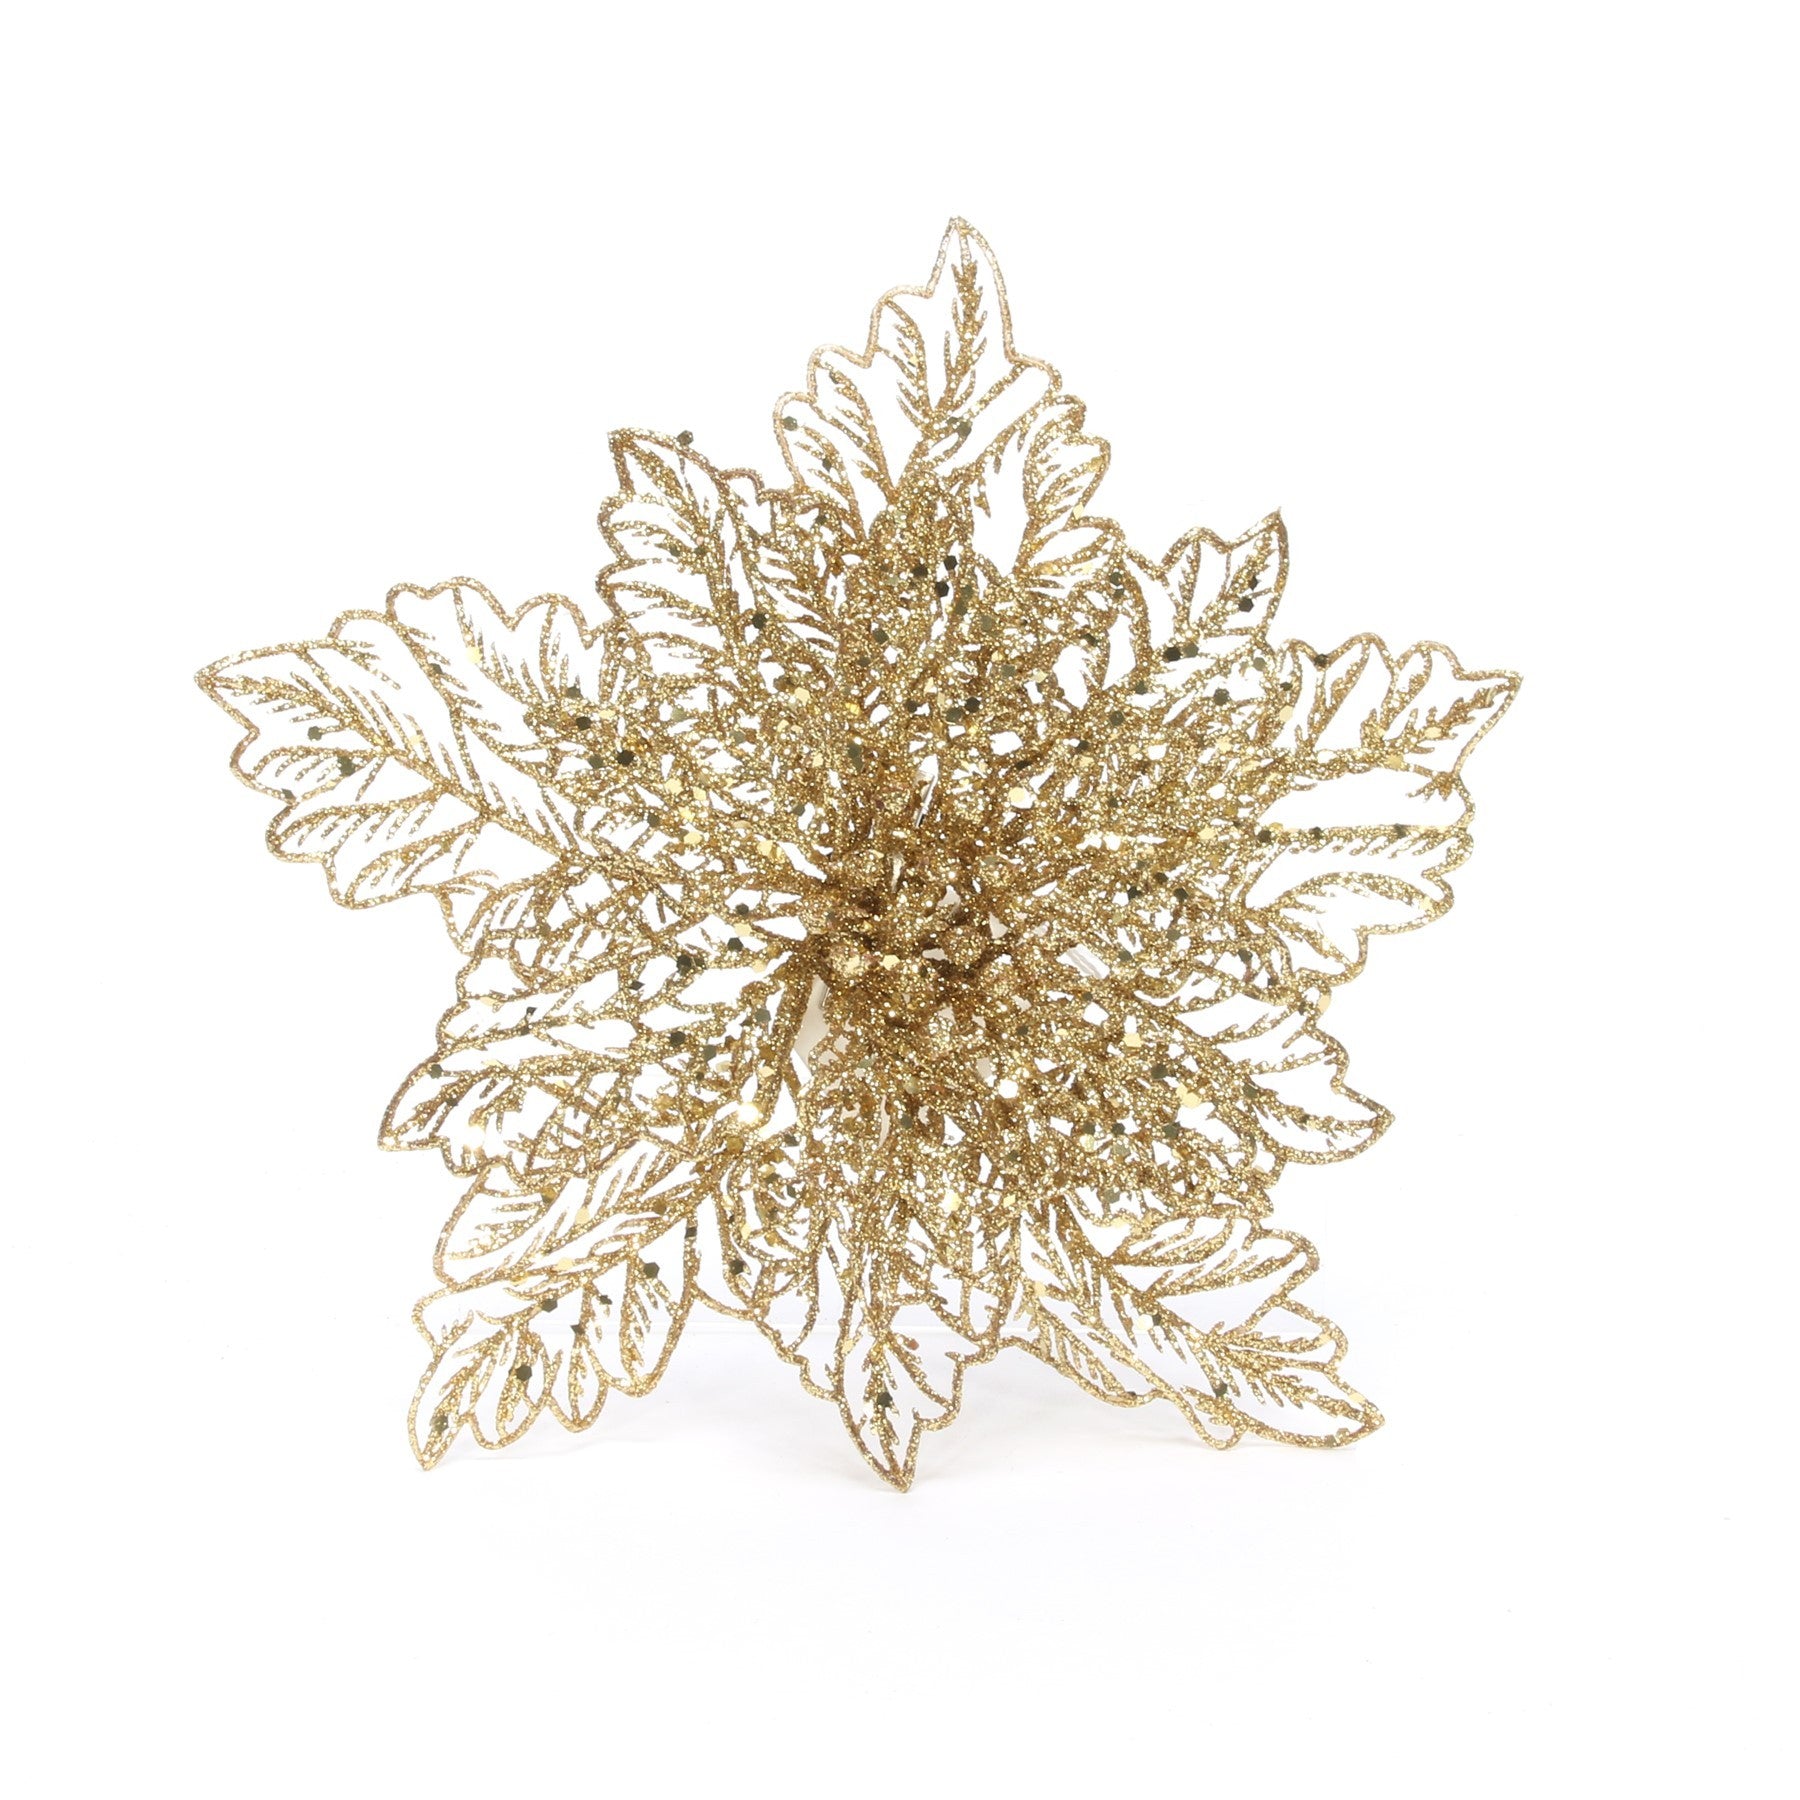 View Gold Glitter Poinsettia with Clip 23cm information